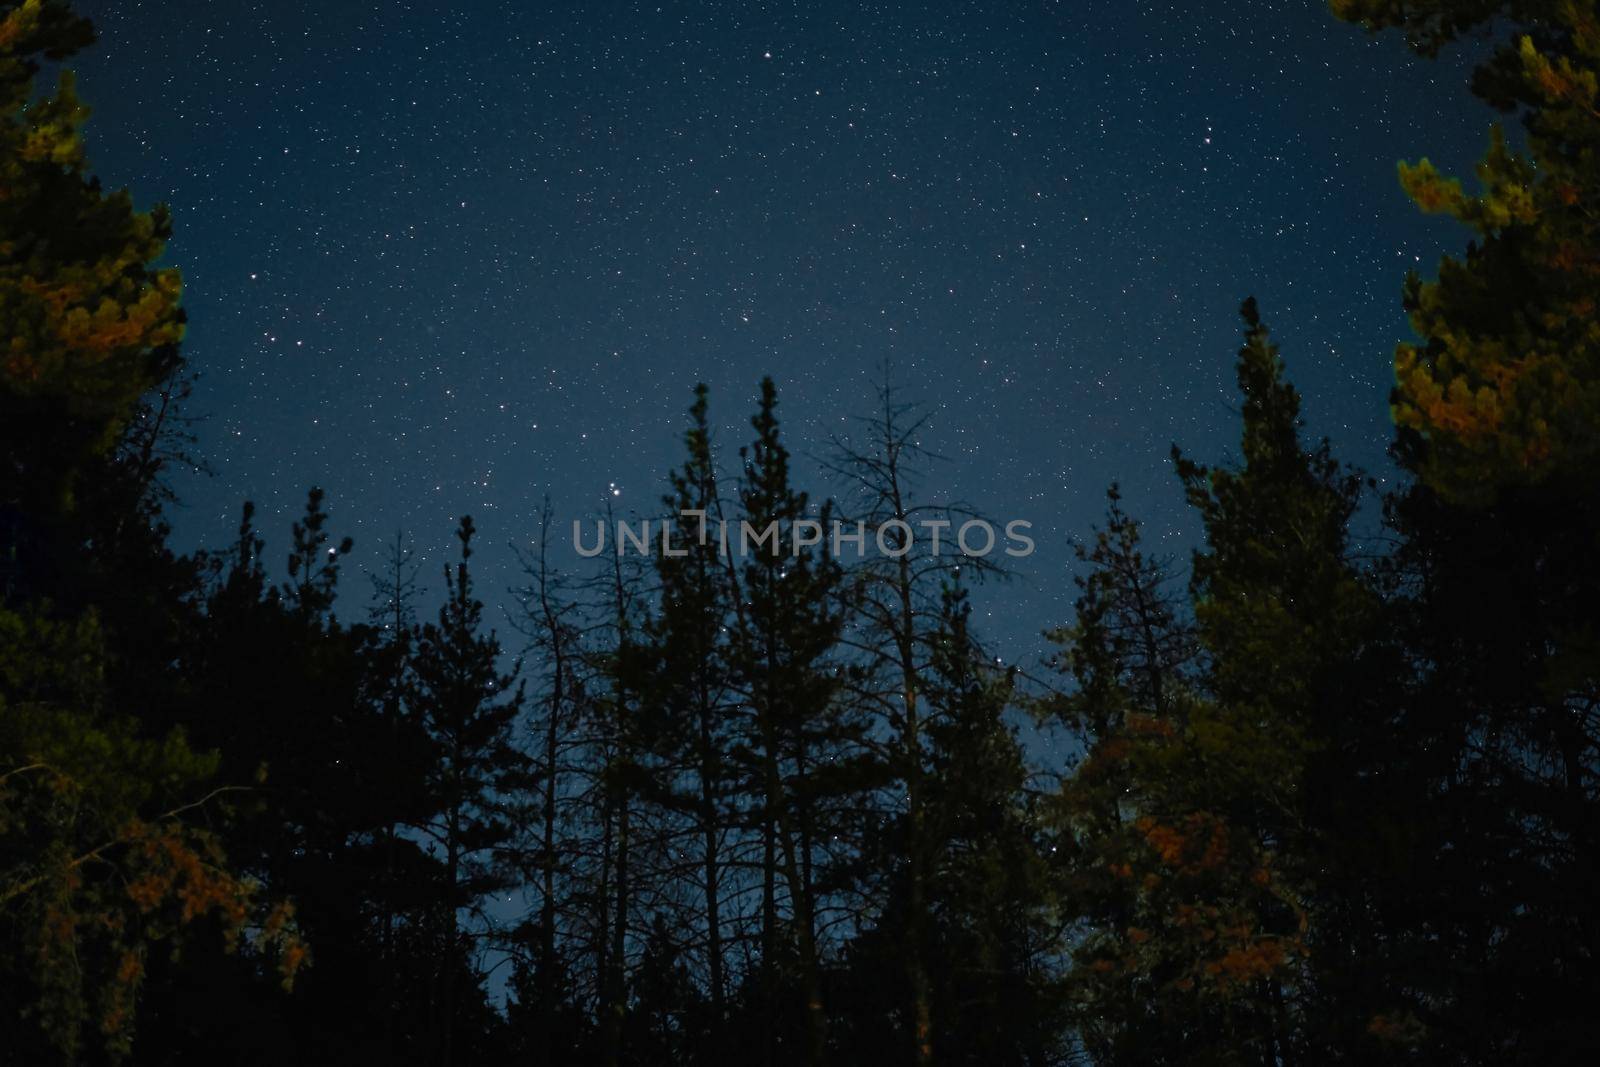 Milky Way rises over the pine trees on a foreground Star night over woodland background